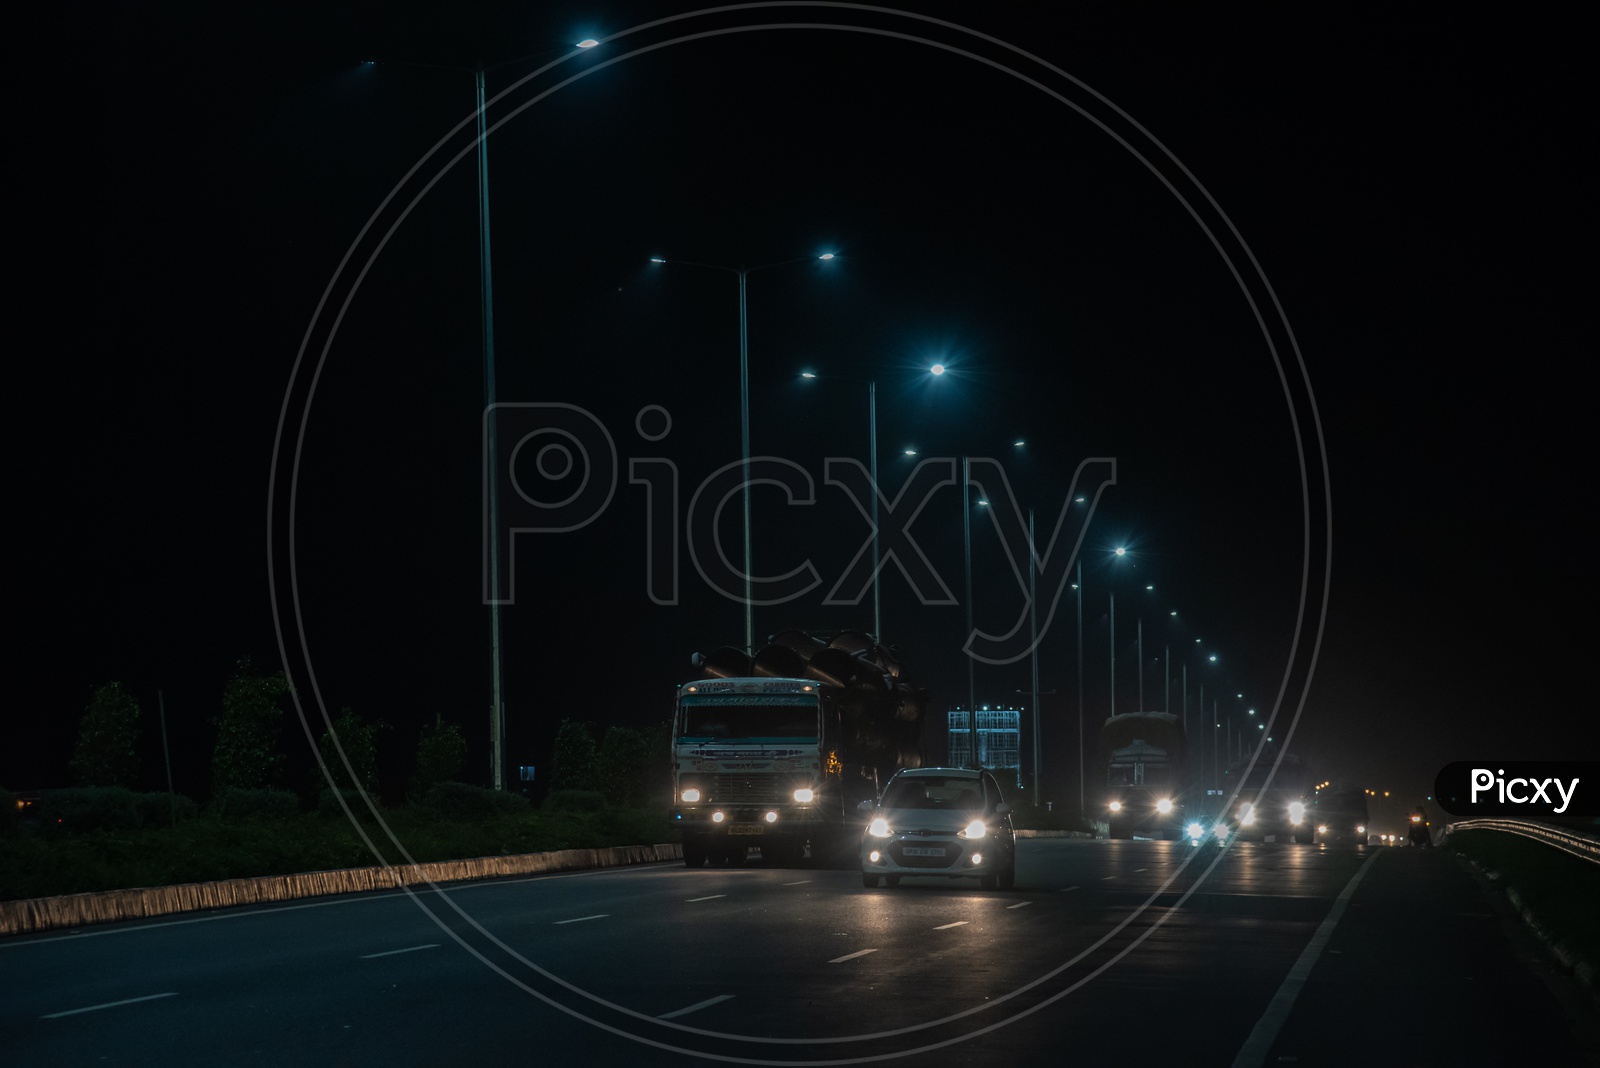 Vehicles/Cars/Bus under the LED Lights on NH 16.